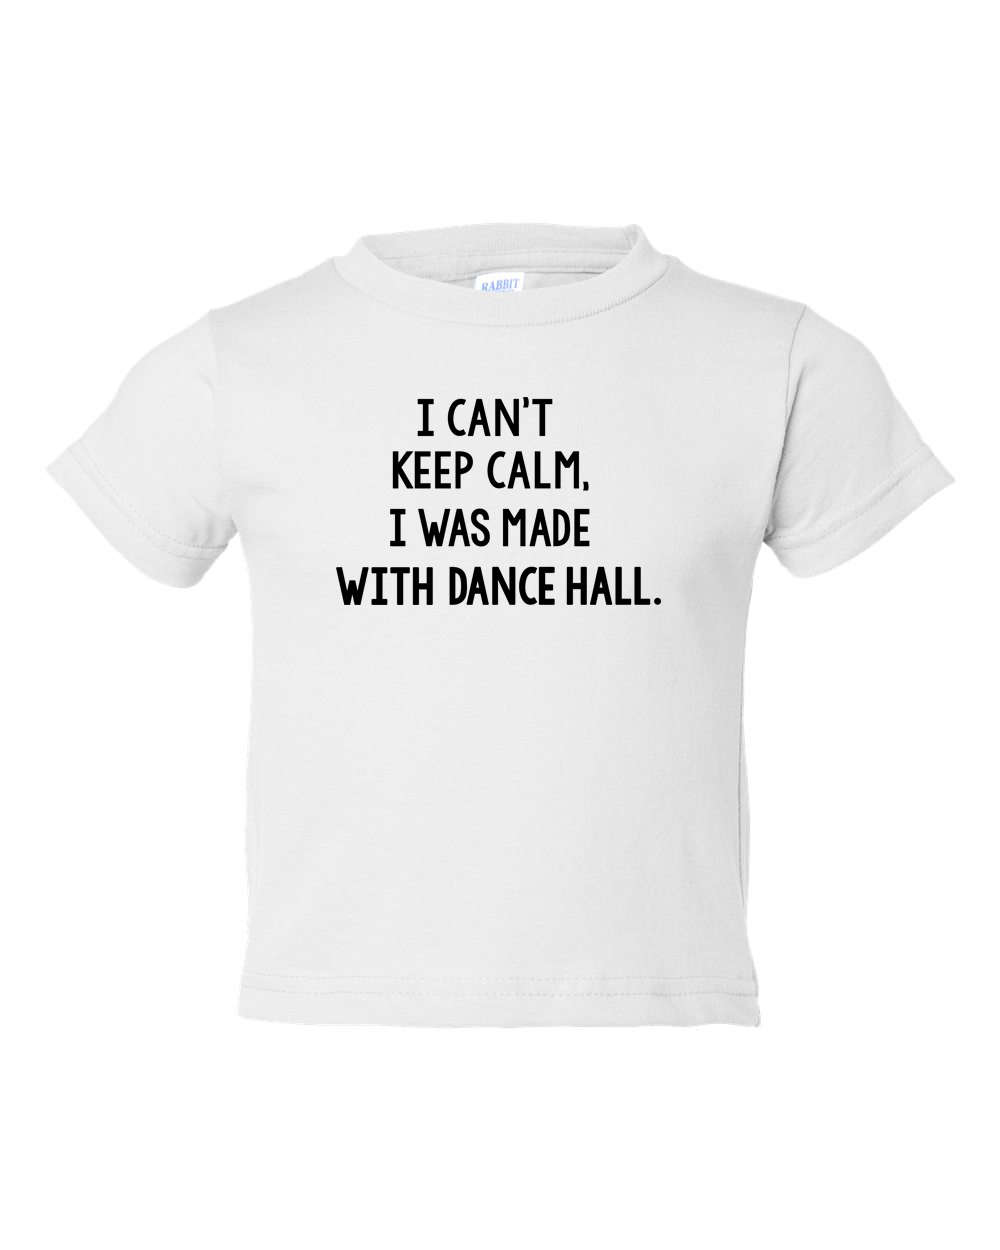 Keep Calm I was Made With Dance Hall,Unique Baby Tee,Funny Unisex Children  Tee, West Indian Baby Shirt,Toddler Funny Tee, Custom Toddler Tee -  Nonverbal Nyc